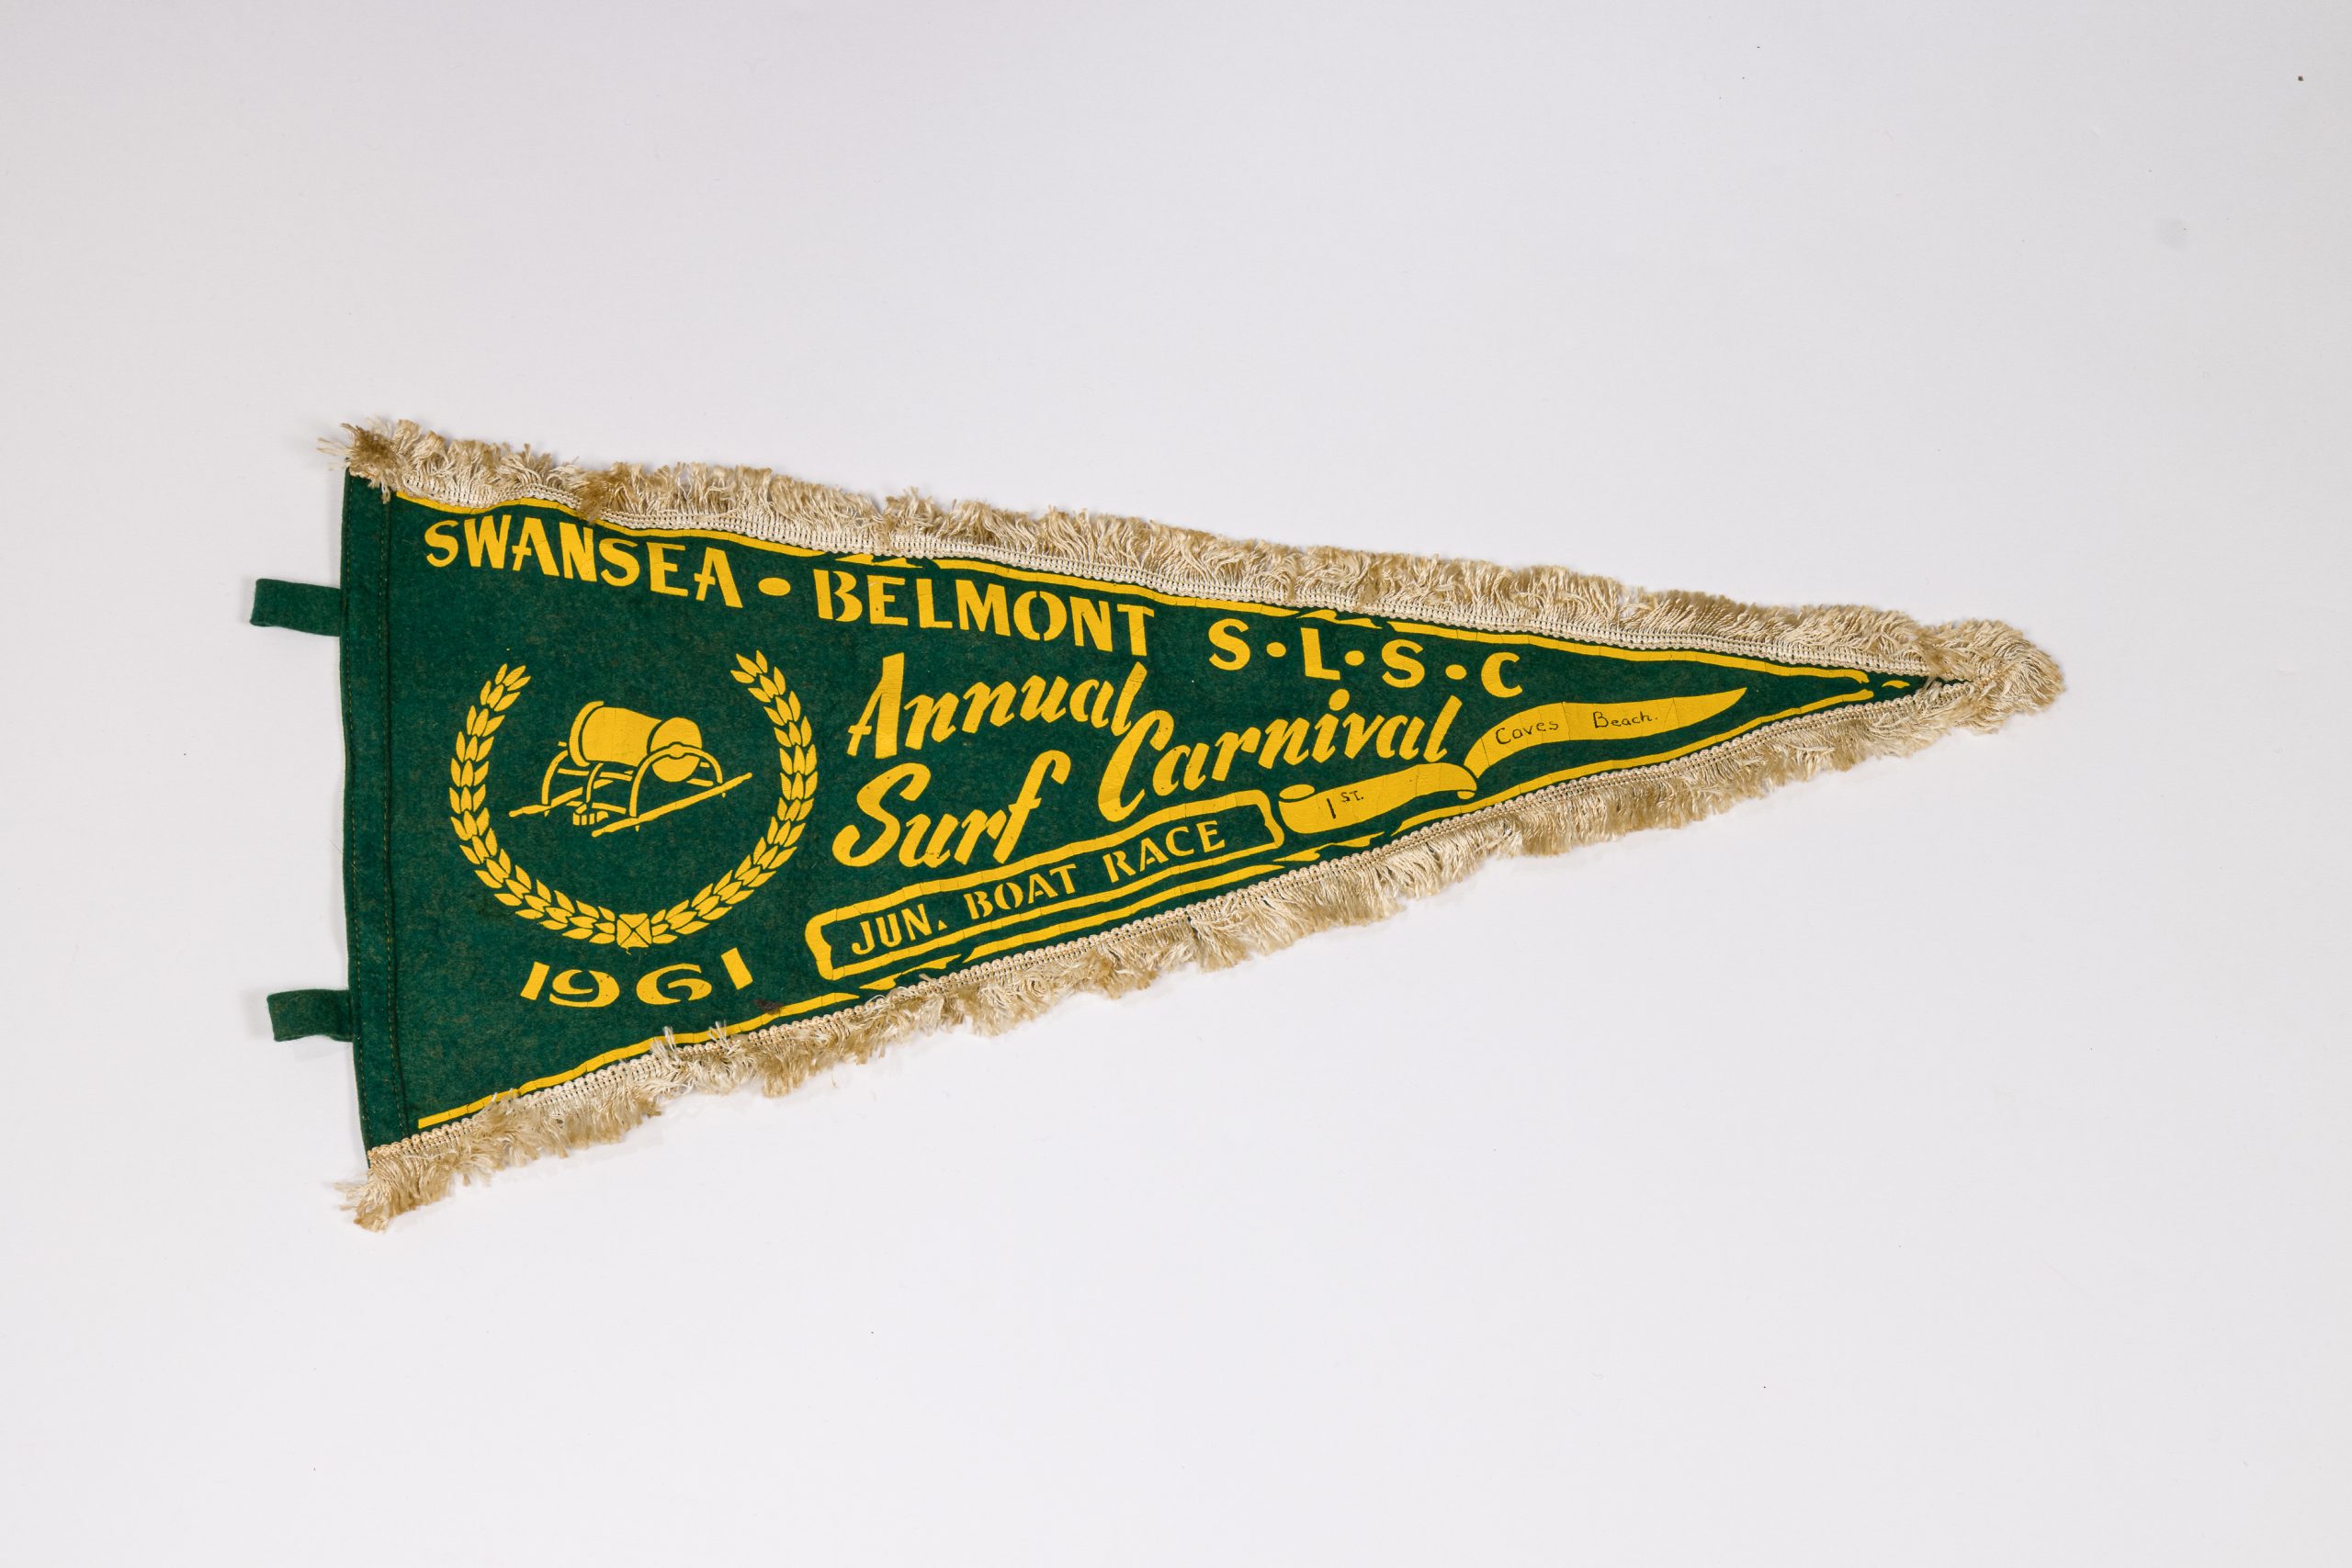 Green and gold pennant with a fuzzy beige trim which reads: "SWANSEA-BELMONT S.L.S.C Annual Surf Carnival 1961 Jun. Boat Race, 1st Caves Beach."